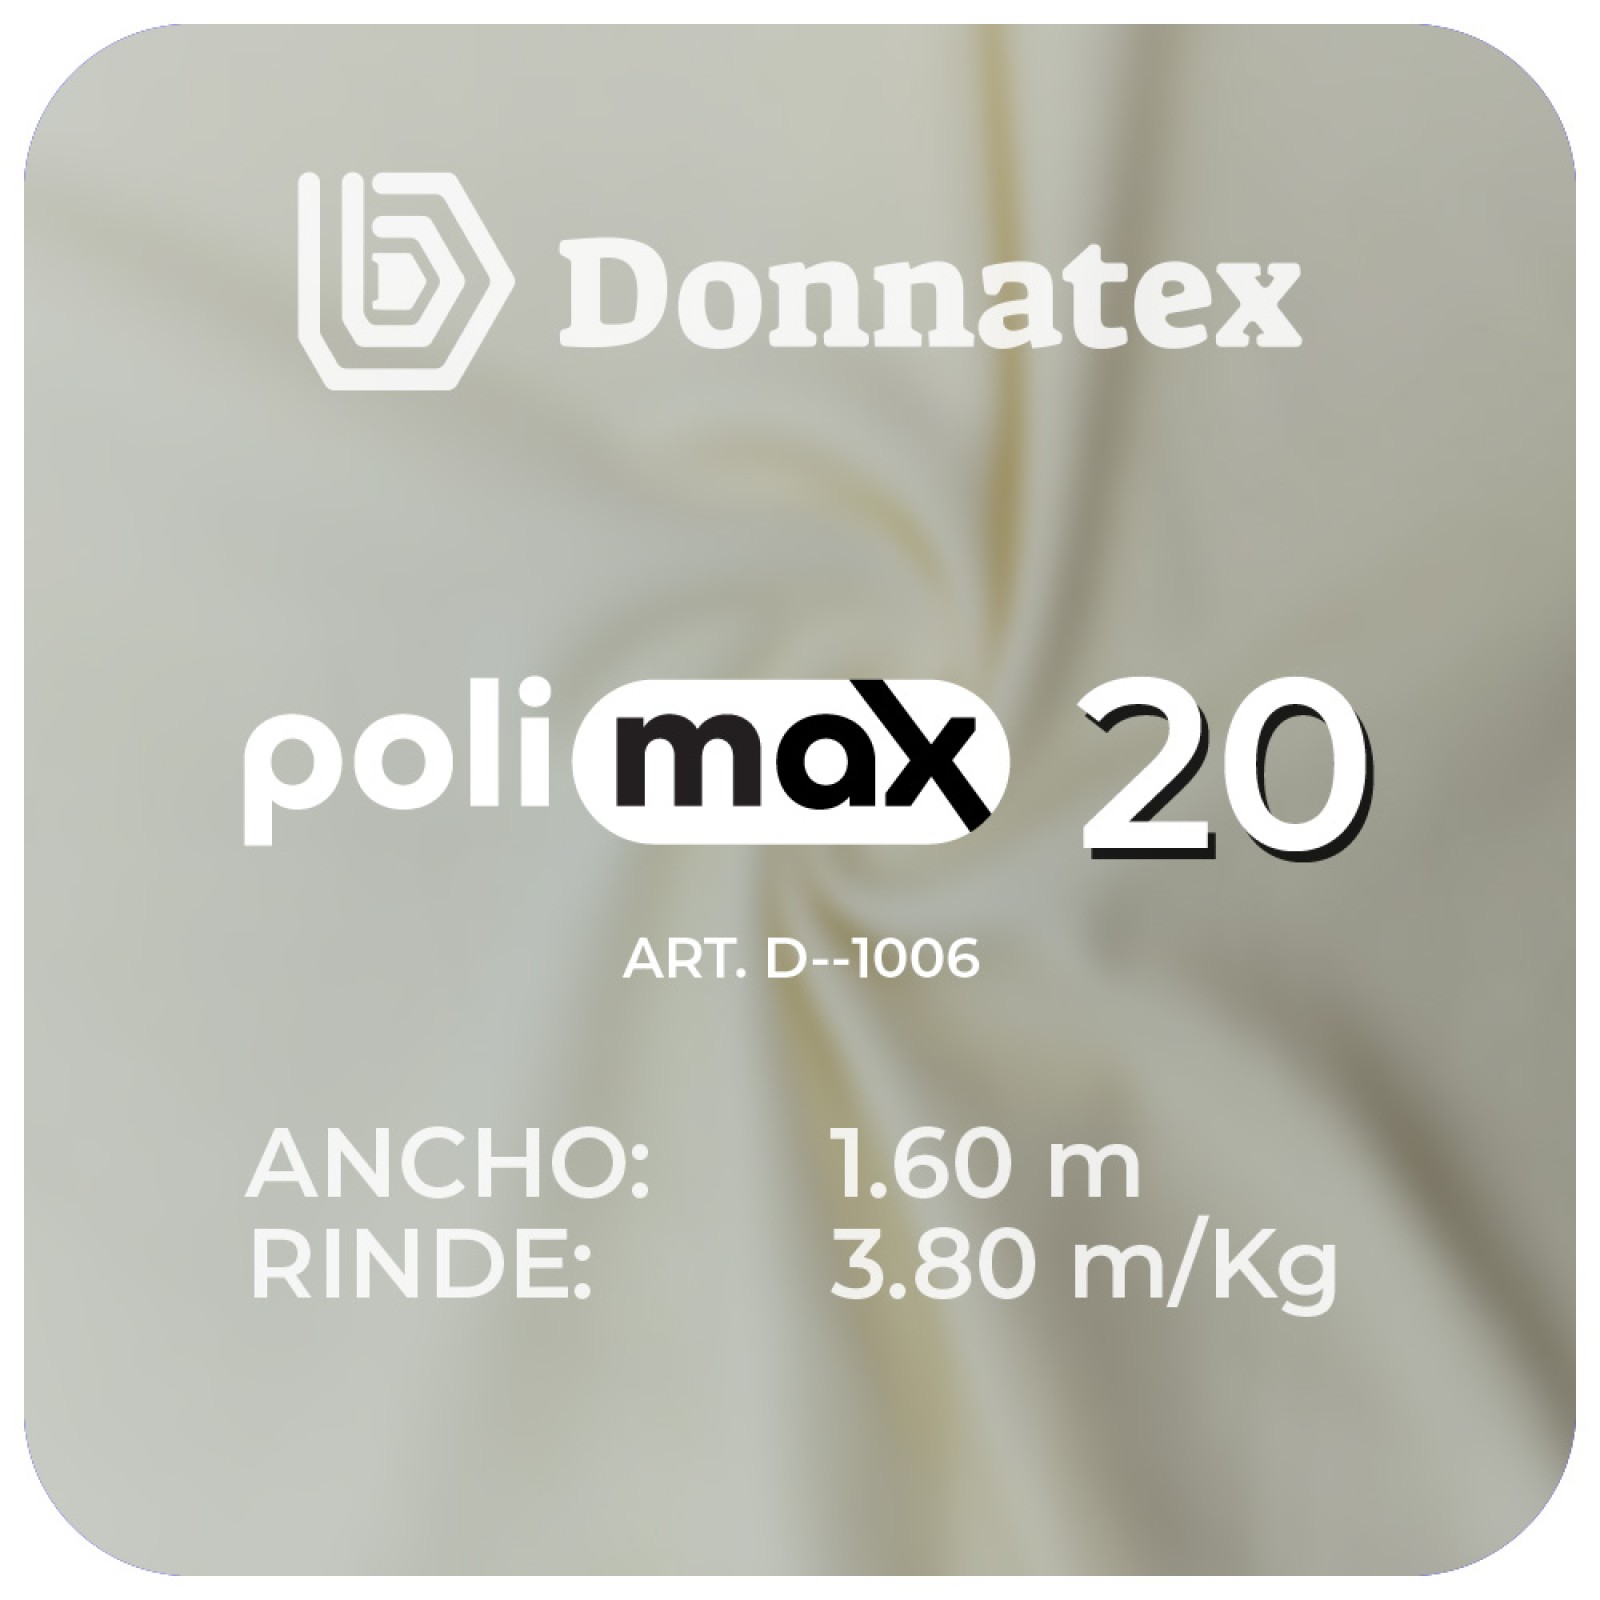 POLIMAX® 20